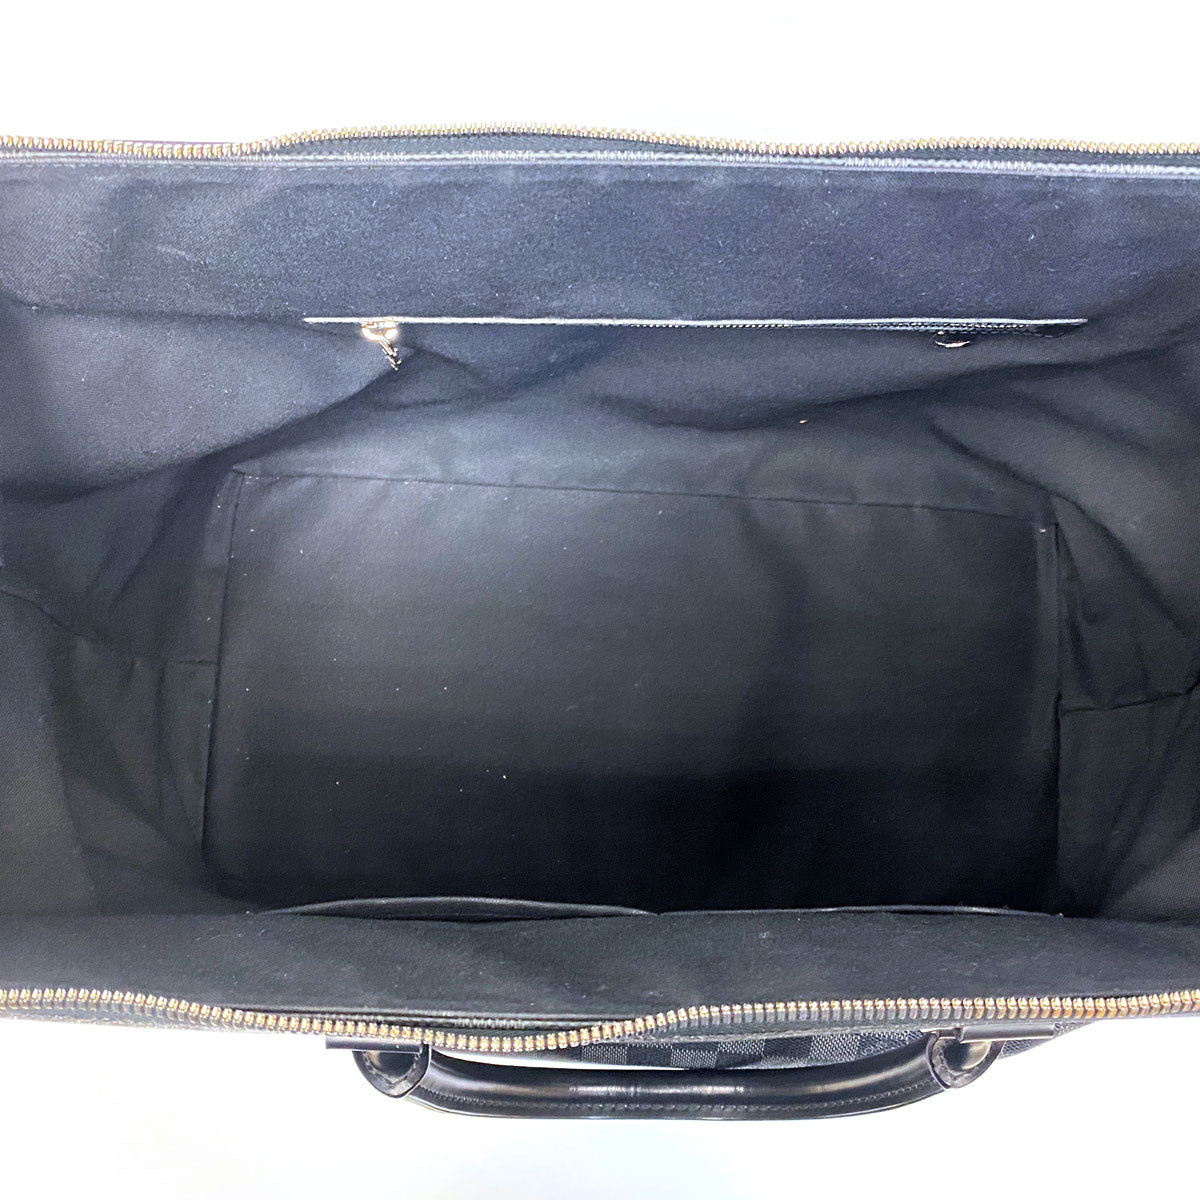 Neo Greenwich leather travel bag